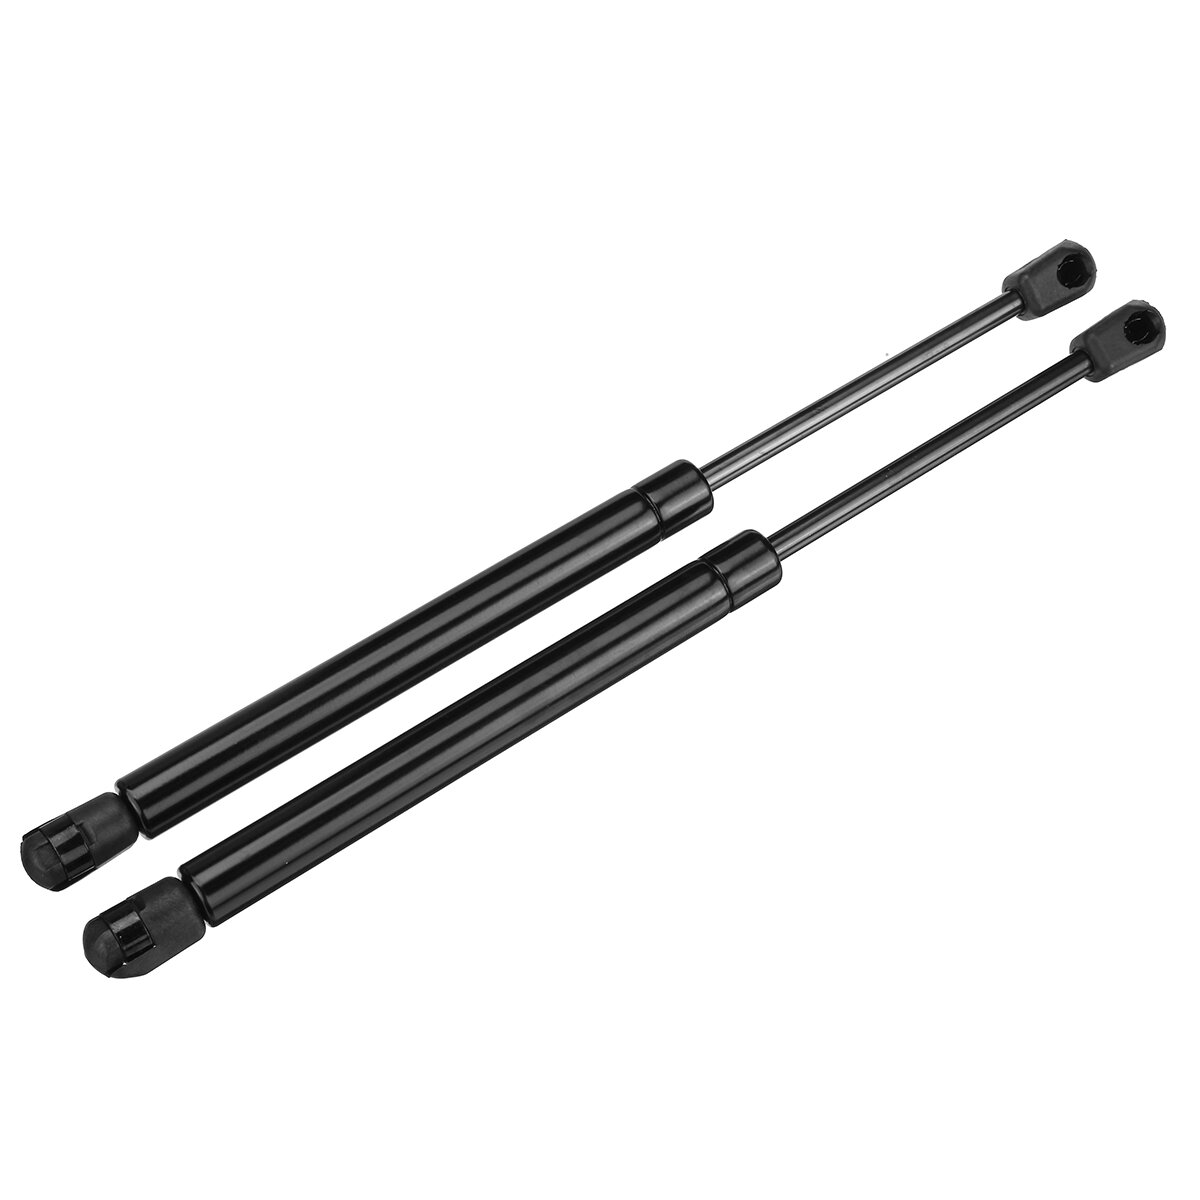 2Pcs Gas Spring Support Struts 365mm-150N Shaft For Ford Falcon FG model boot XR6 XR8 2008-2014